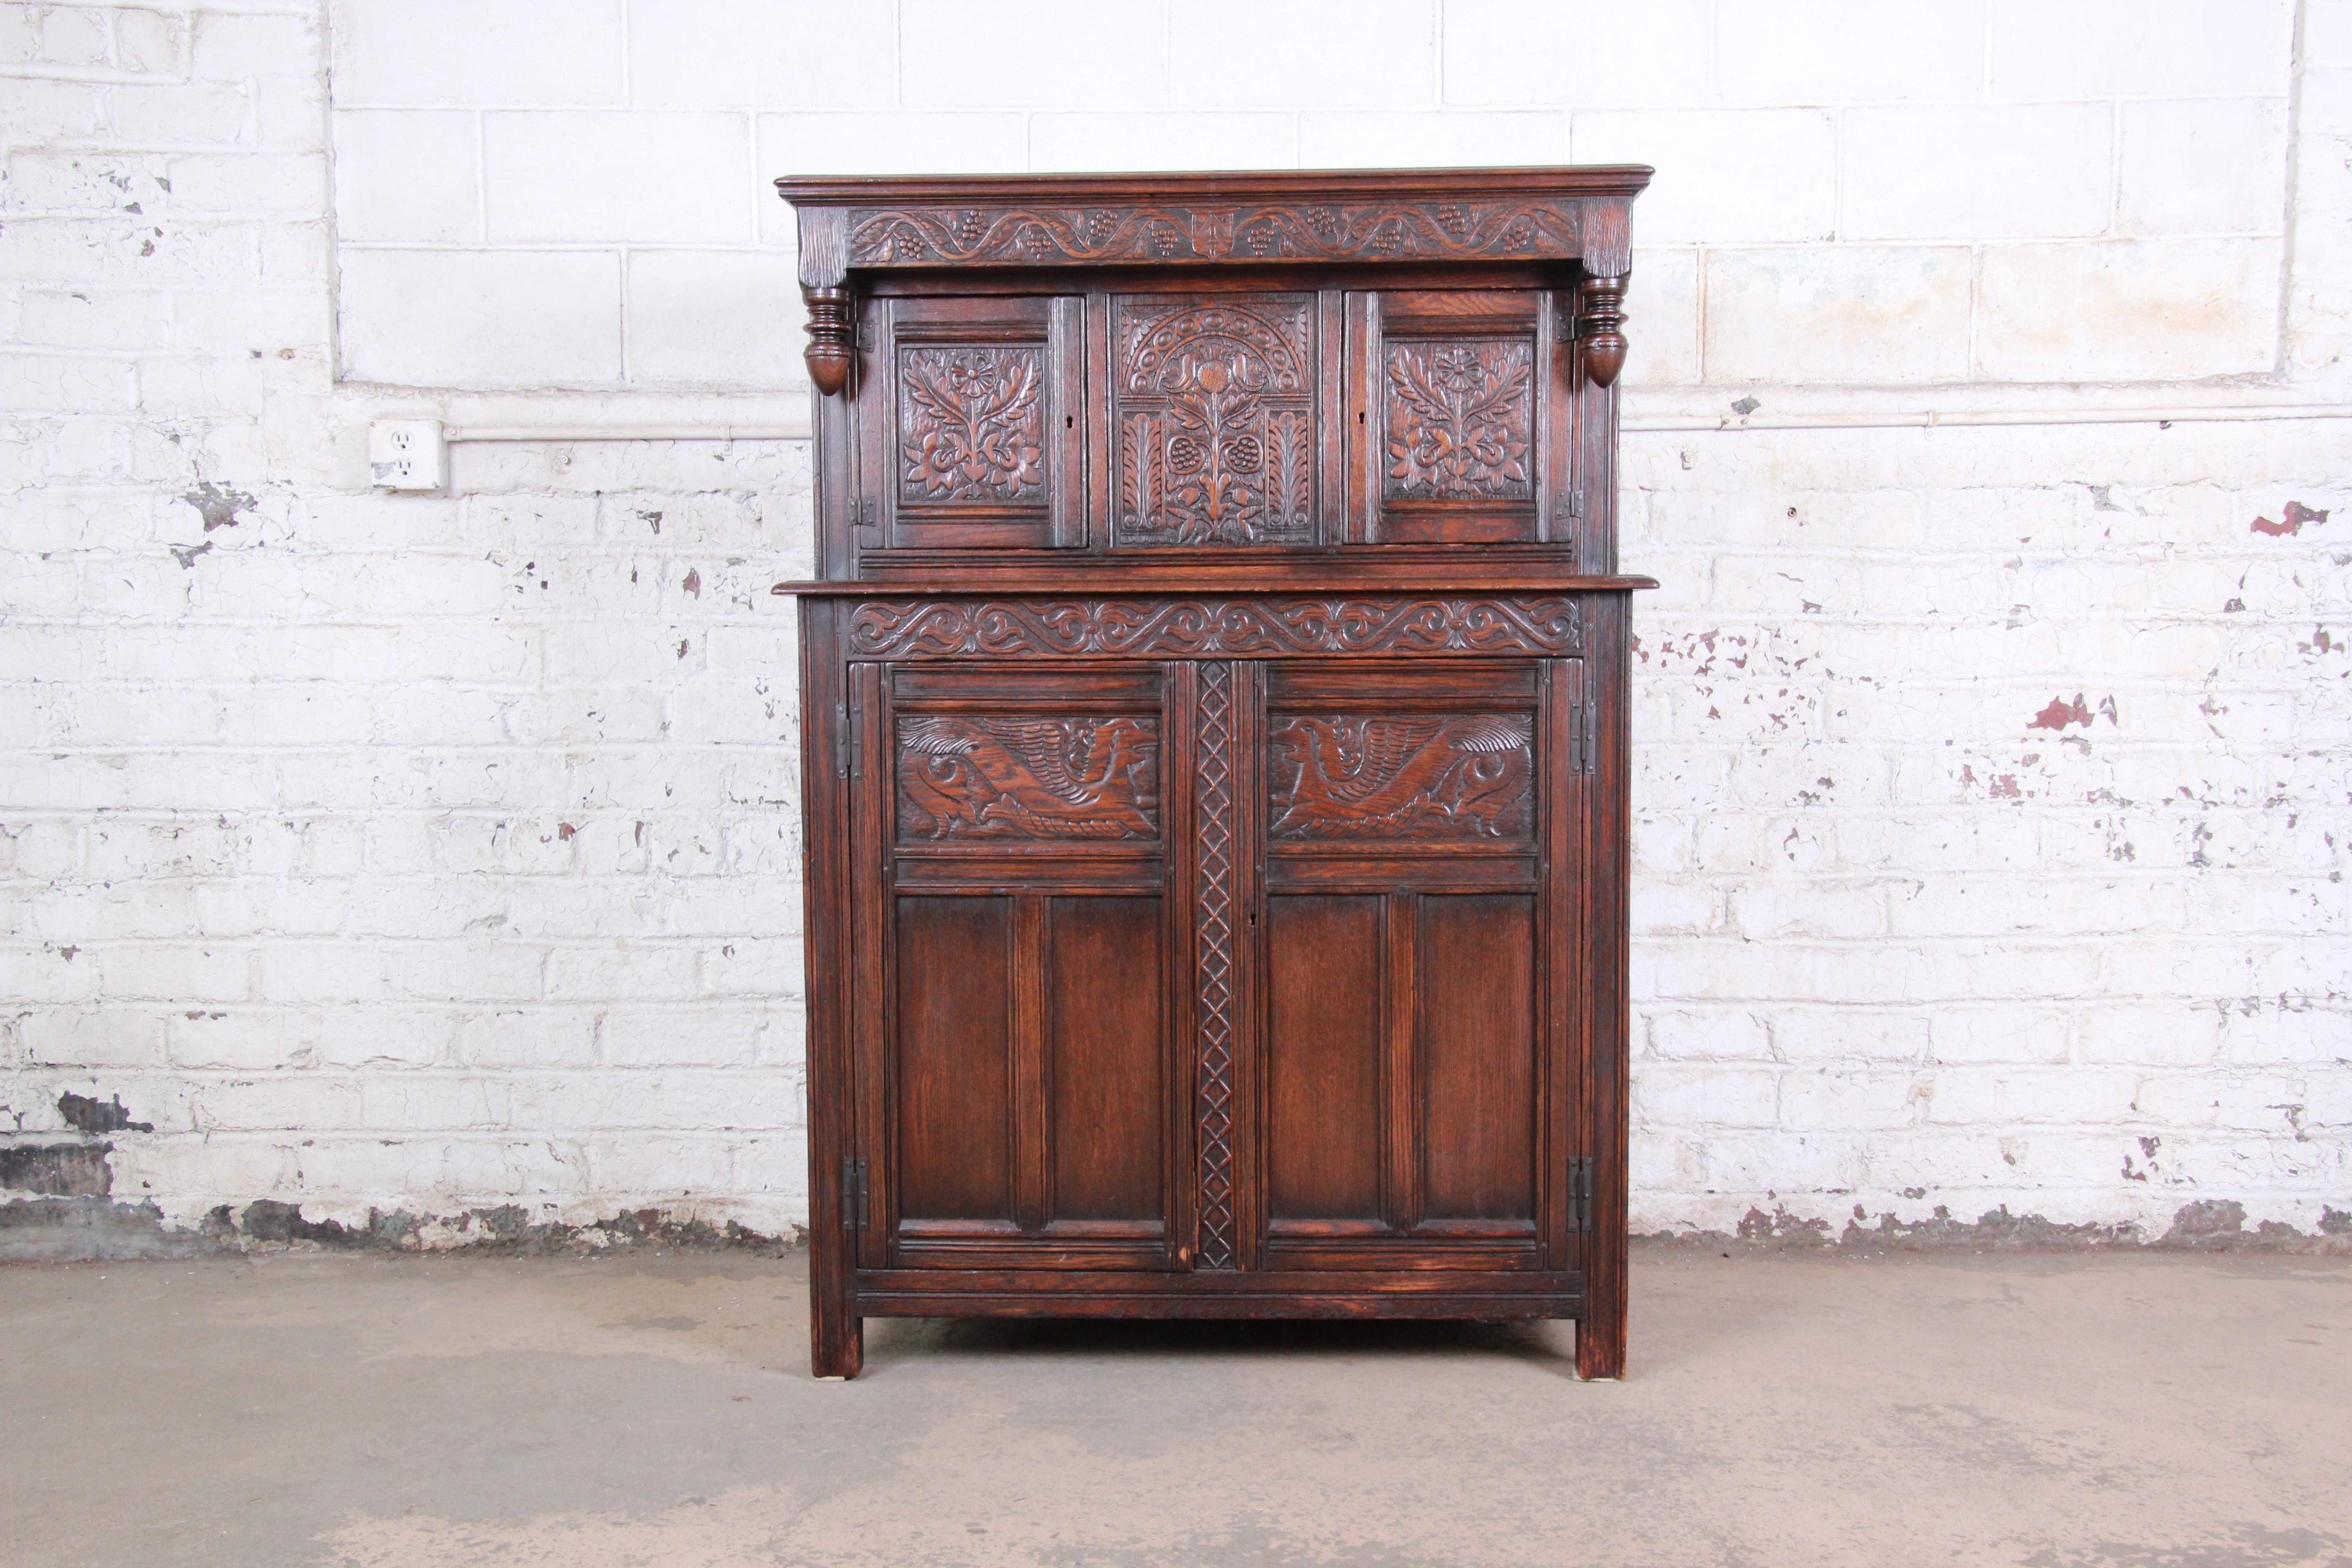 An exceptional antique carved oak bar cabinet by Kensington Furniture Co. of New York, circa 1920s. The cabinet features solid oak construction with beautiful carved wood details. It offers ample storage, with two cabinets behind carved doors at the